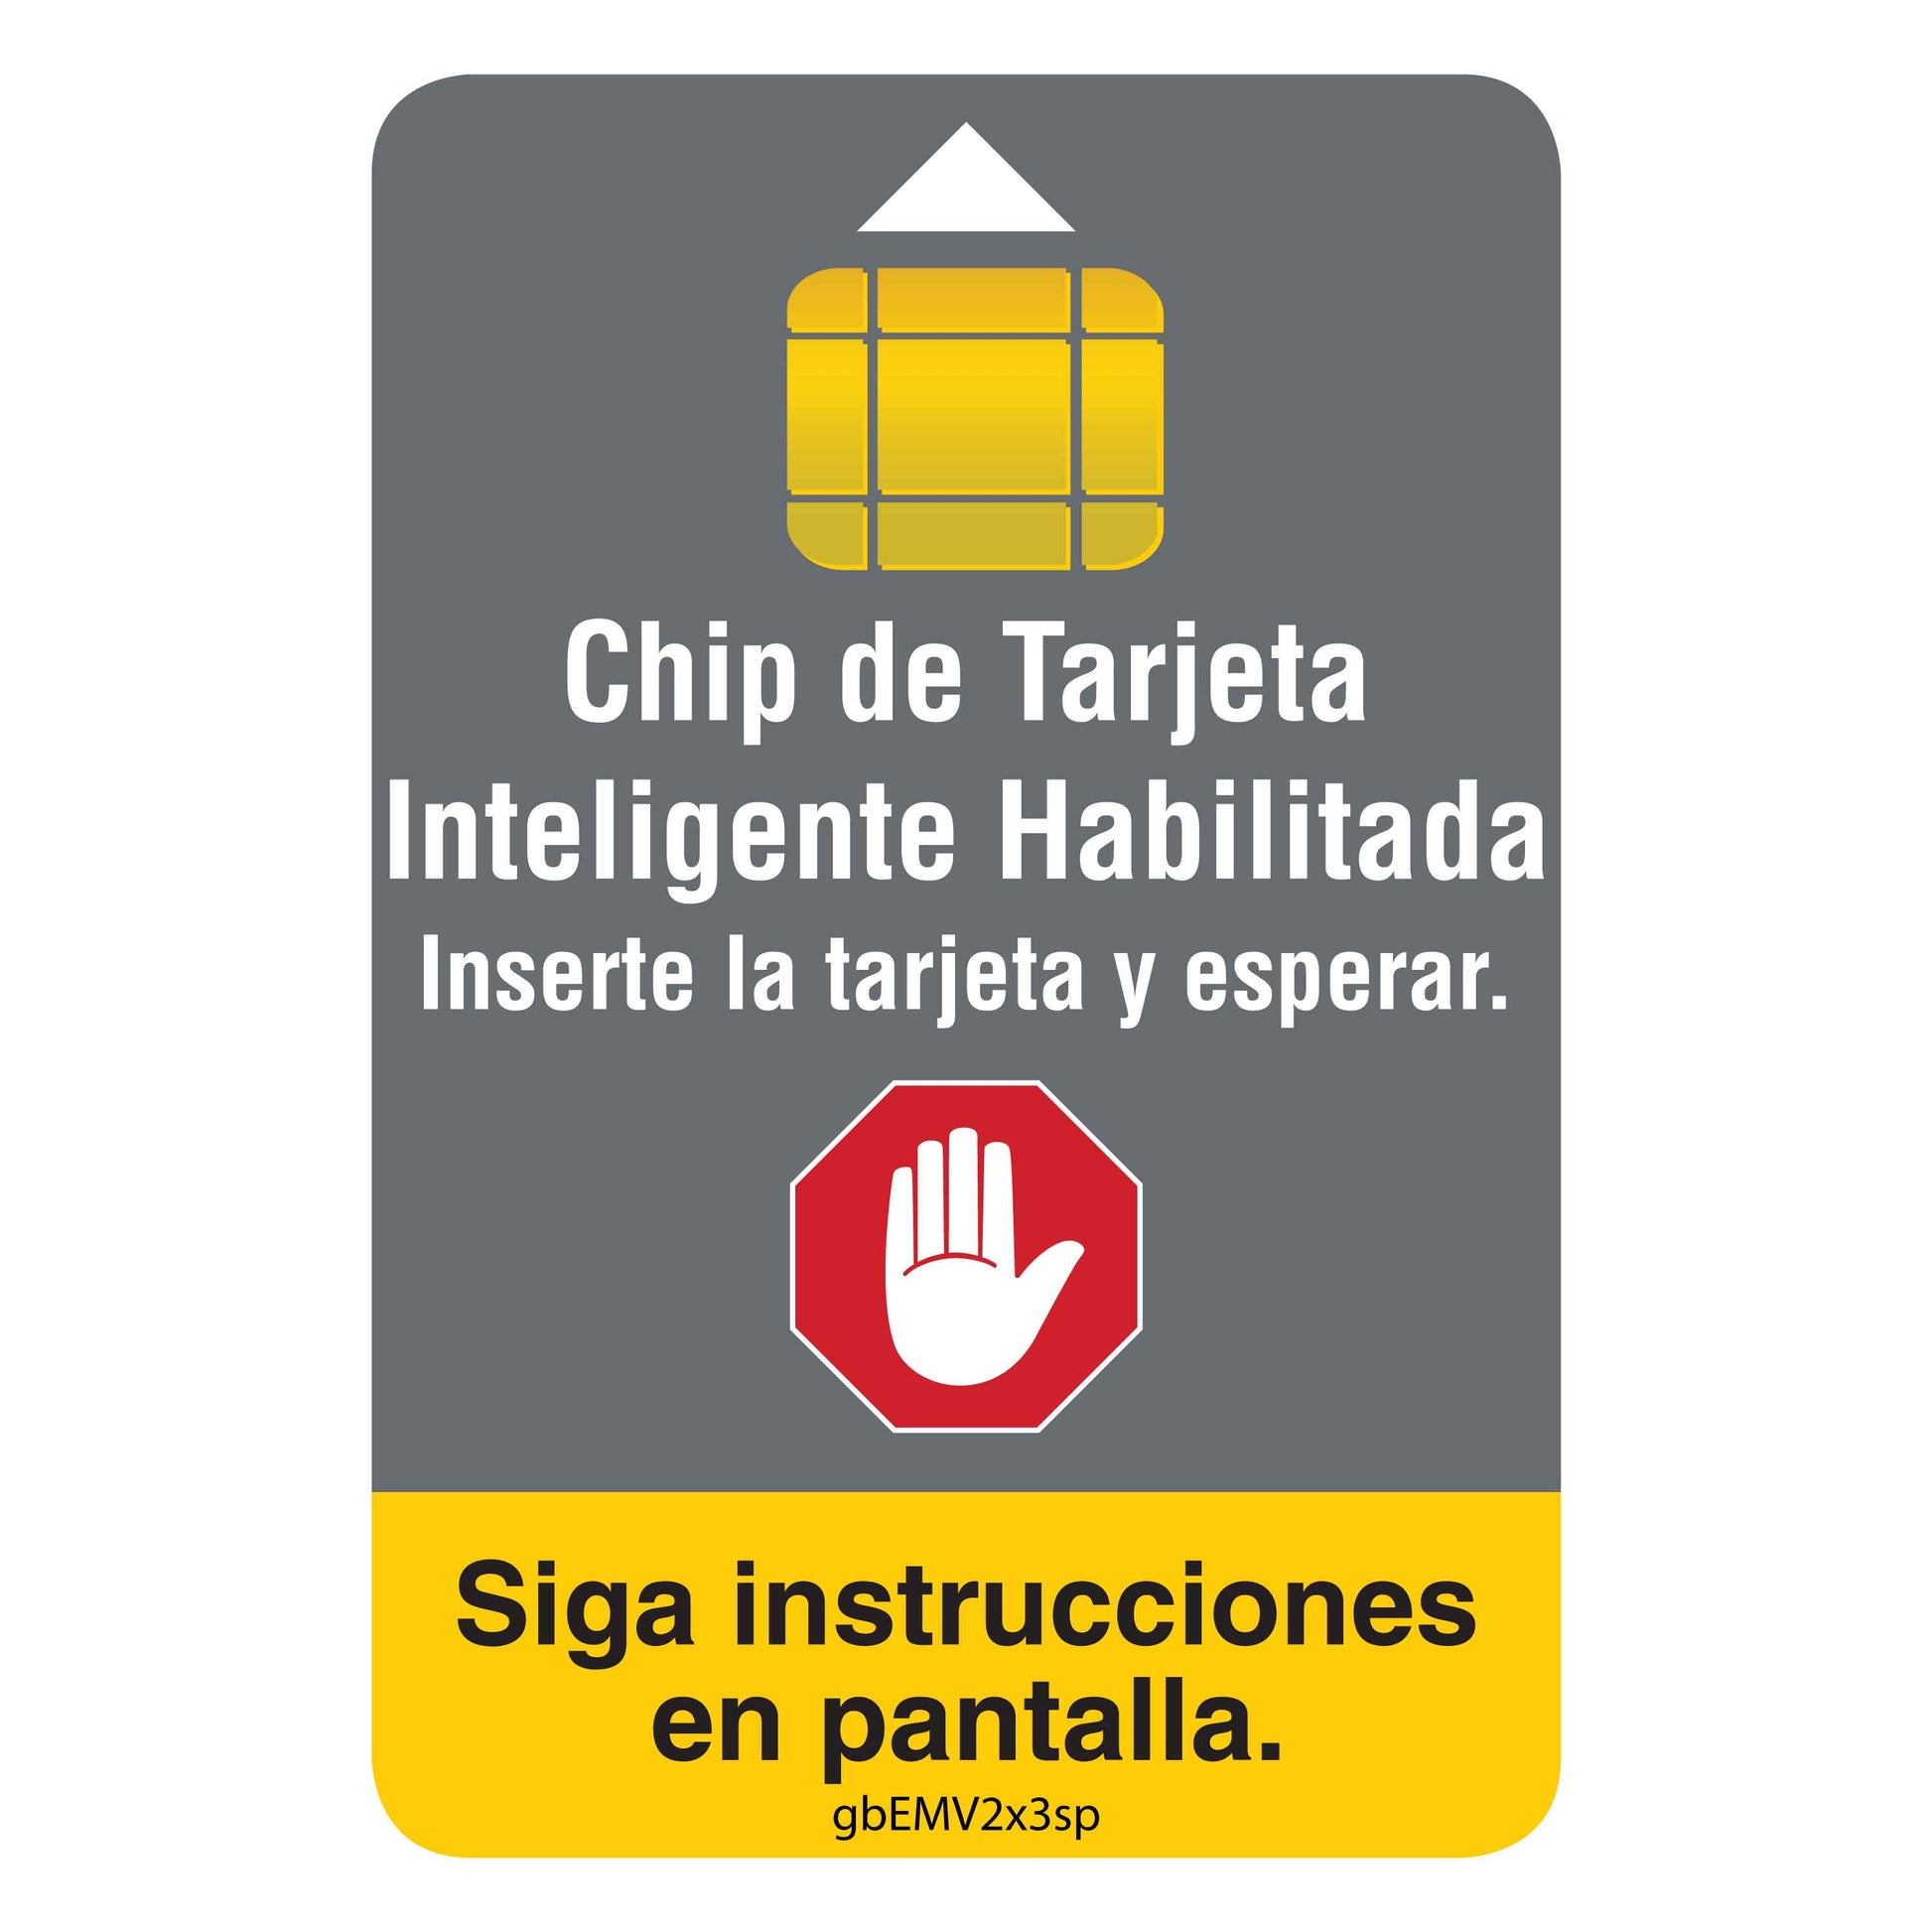 Chip Enabled Smart Card Decal in Spanish2 inches by 3 inches in size. 